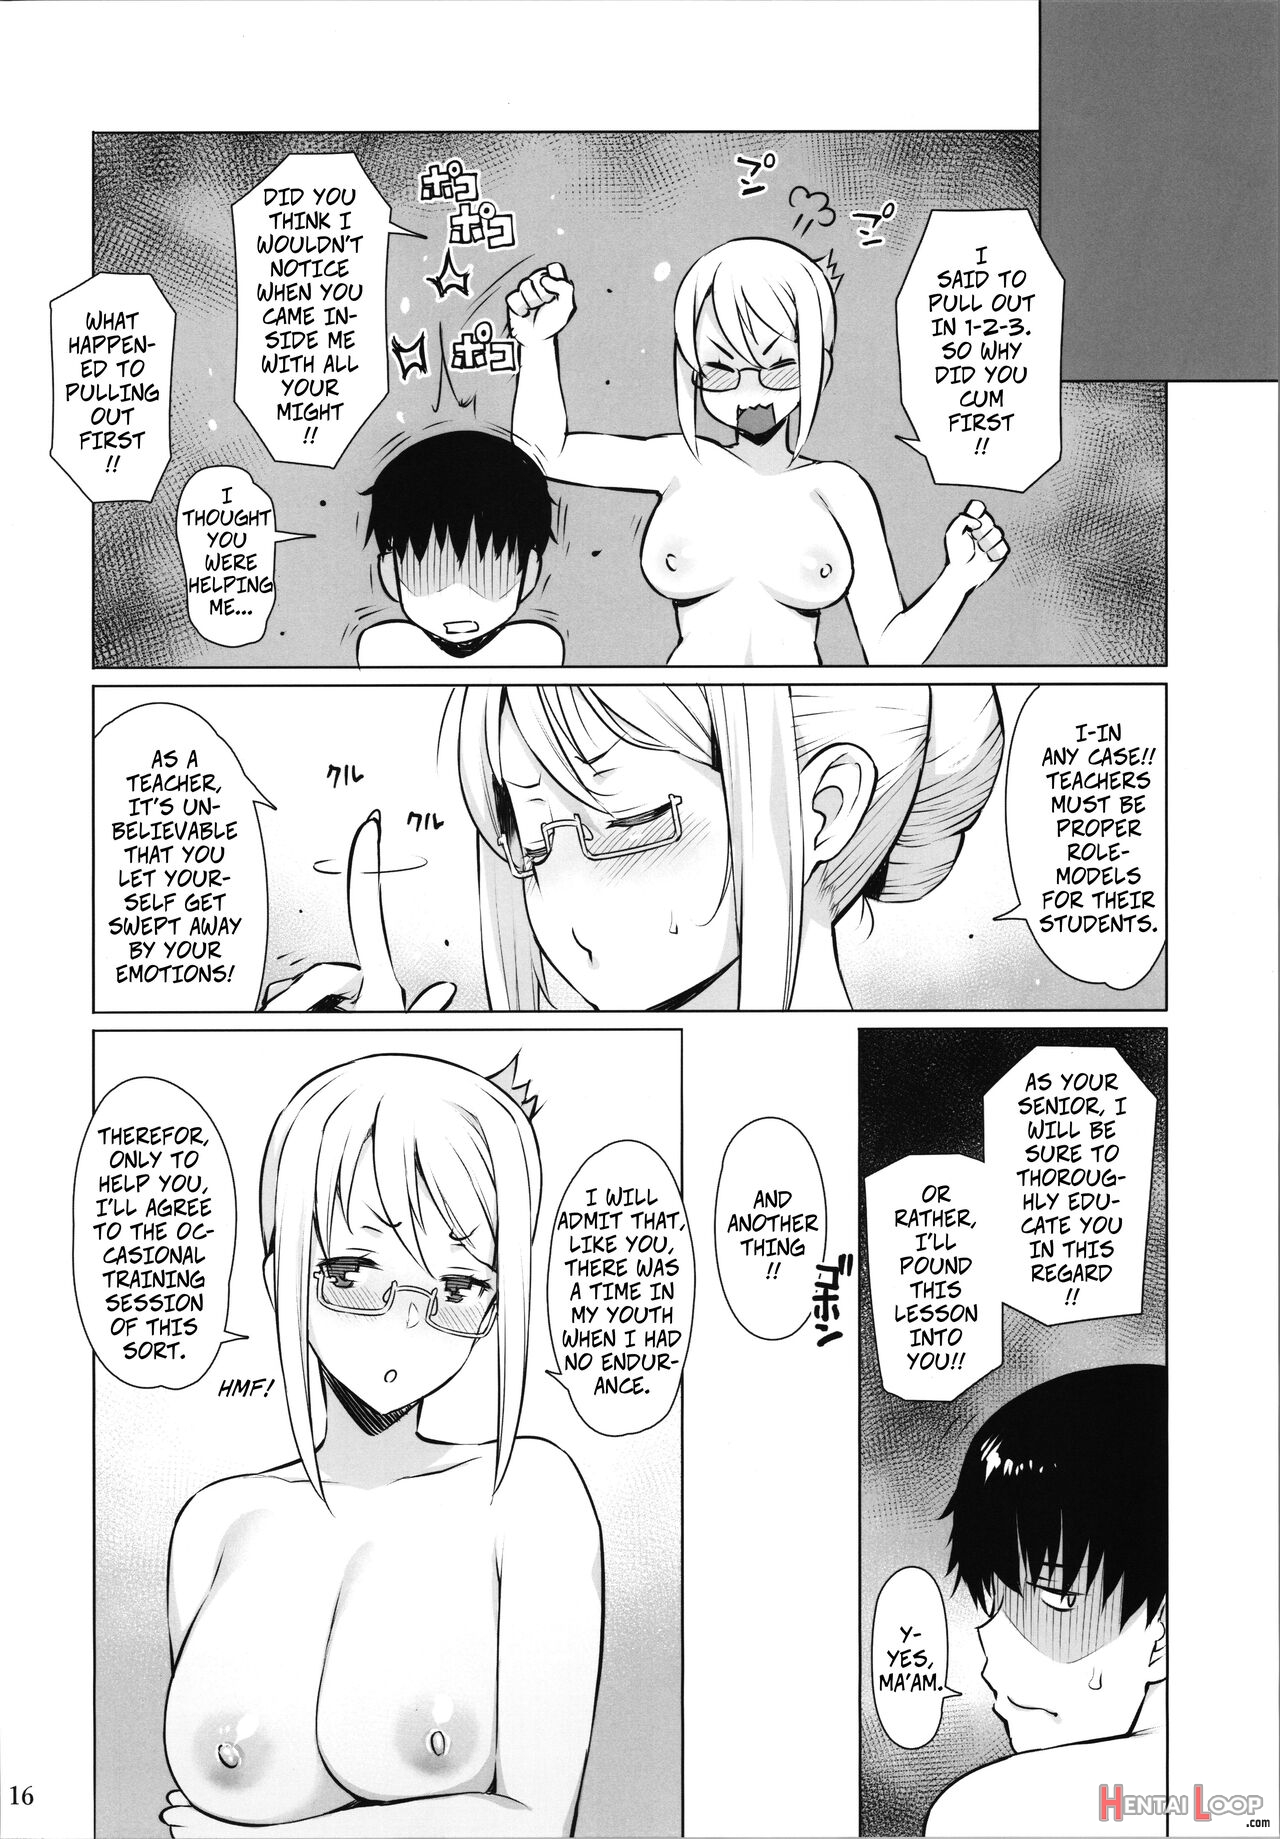 Hito To Shite -- As An Adult page 17